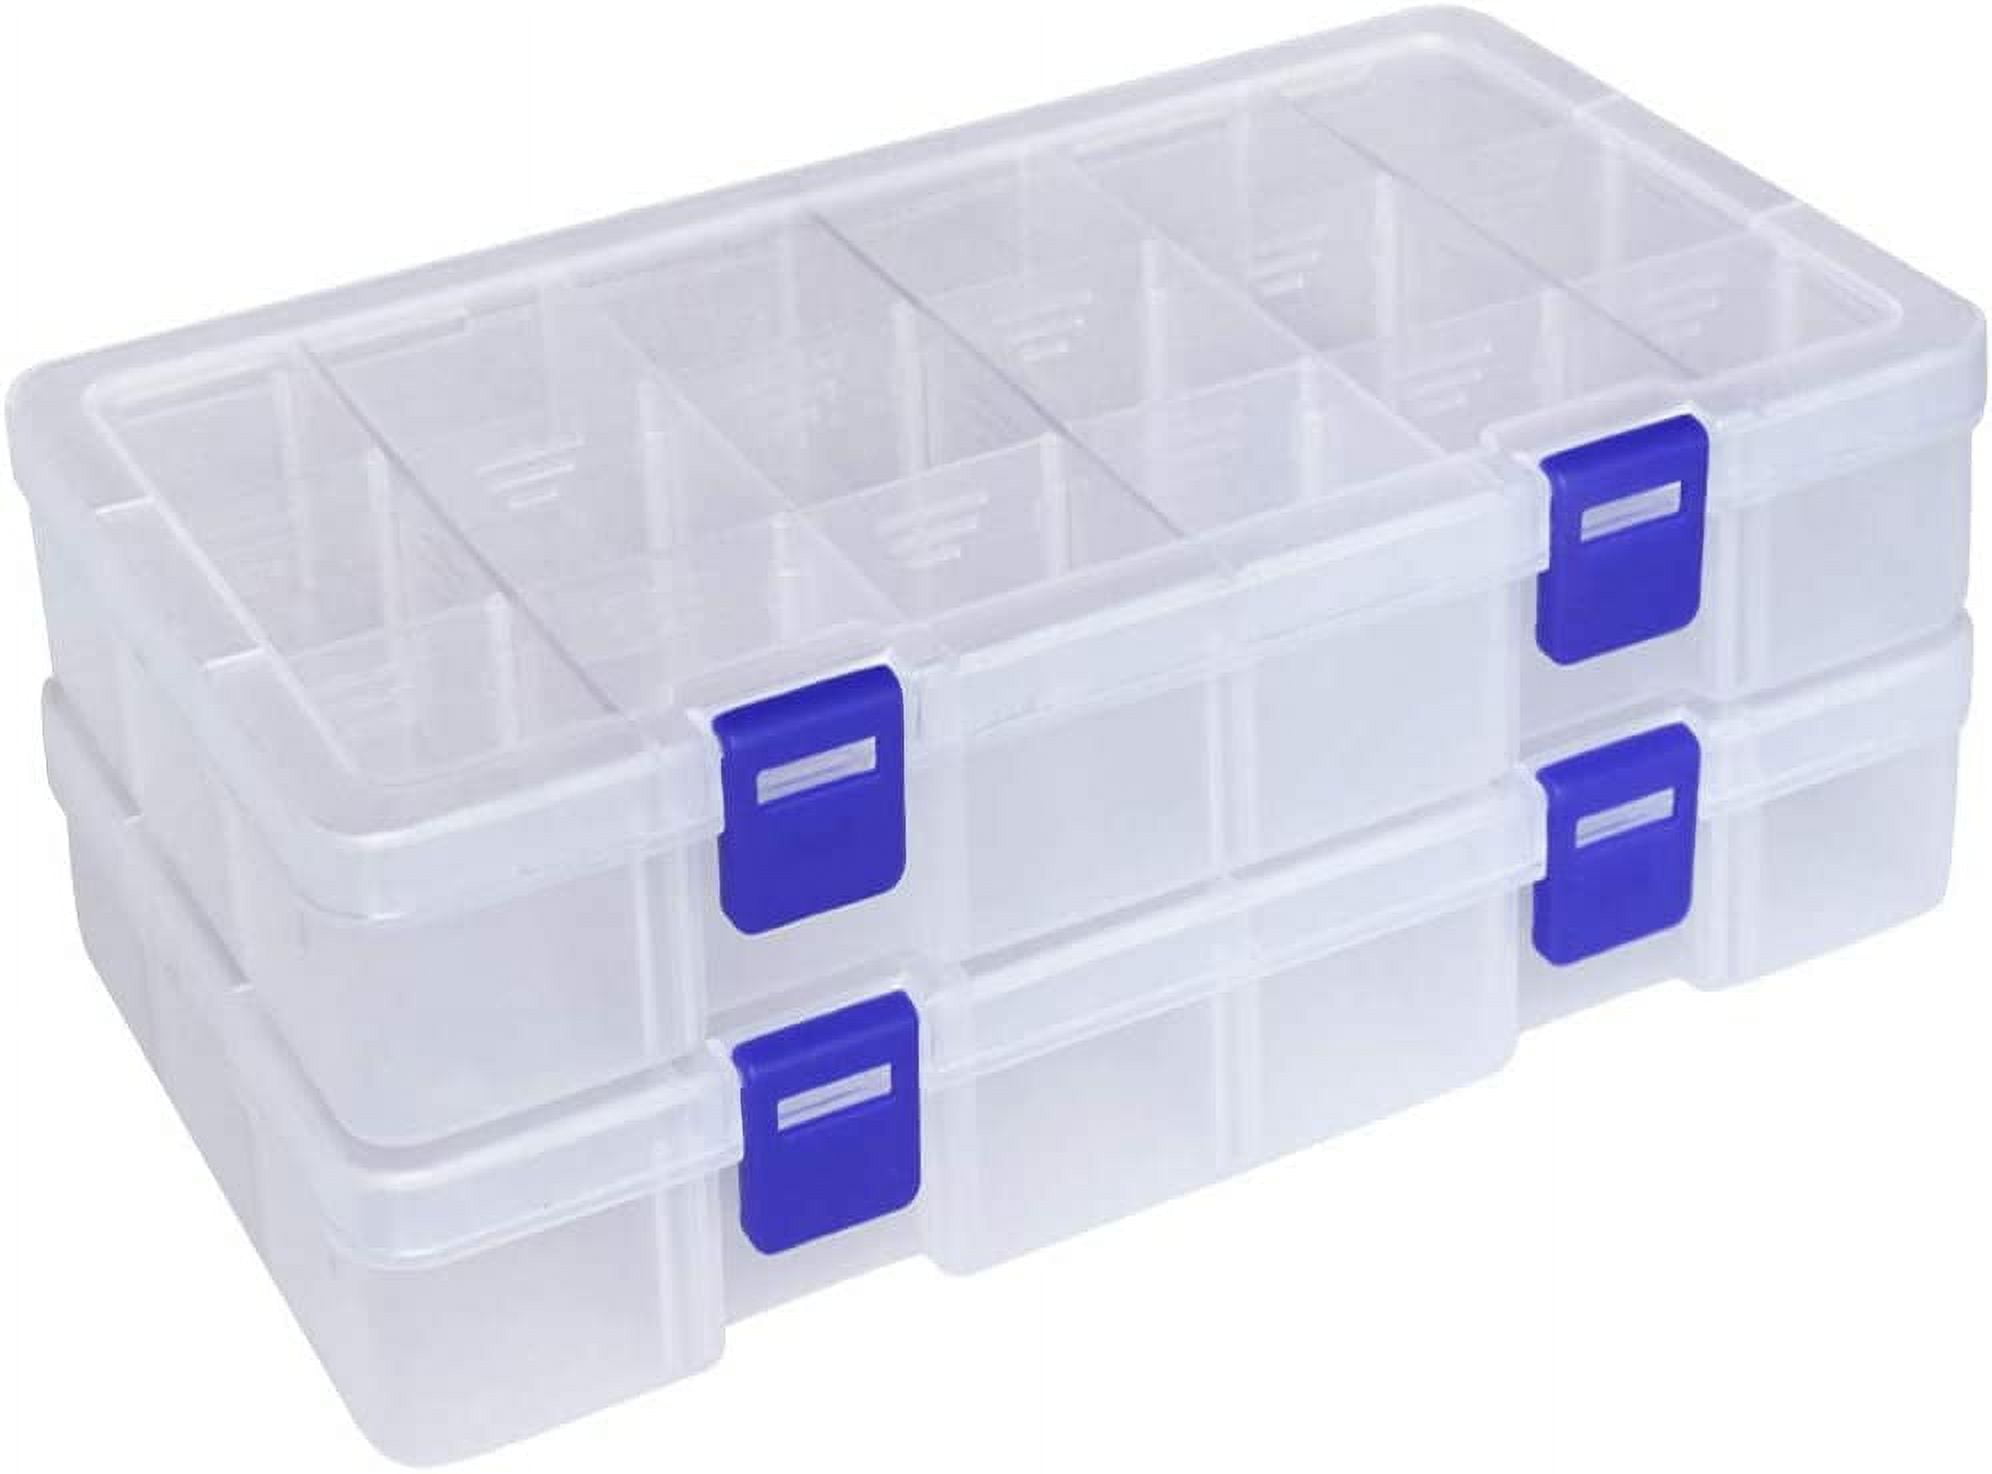 Clear square plastic Container with dividers - 6-3/4″ x 3-3/16″ x 1-5/8″